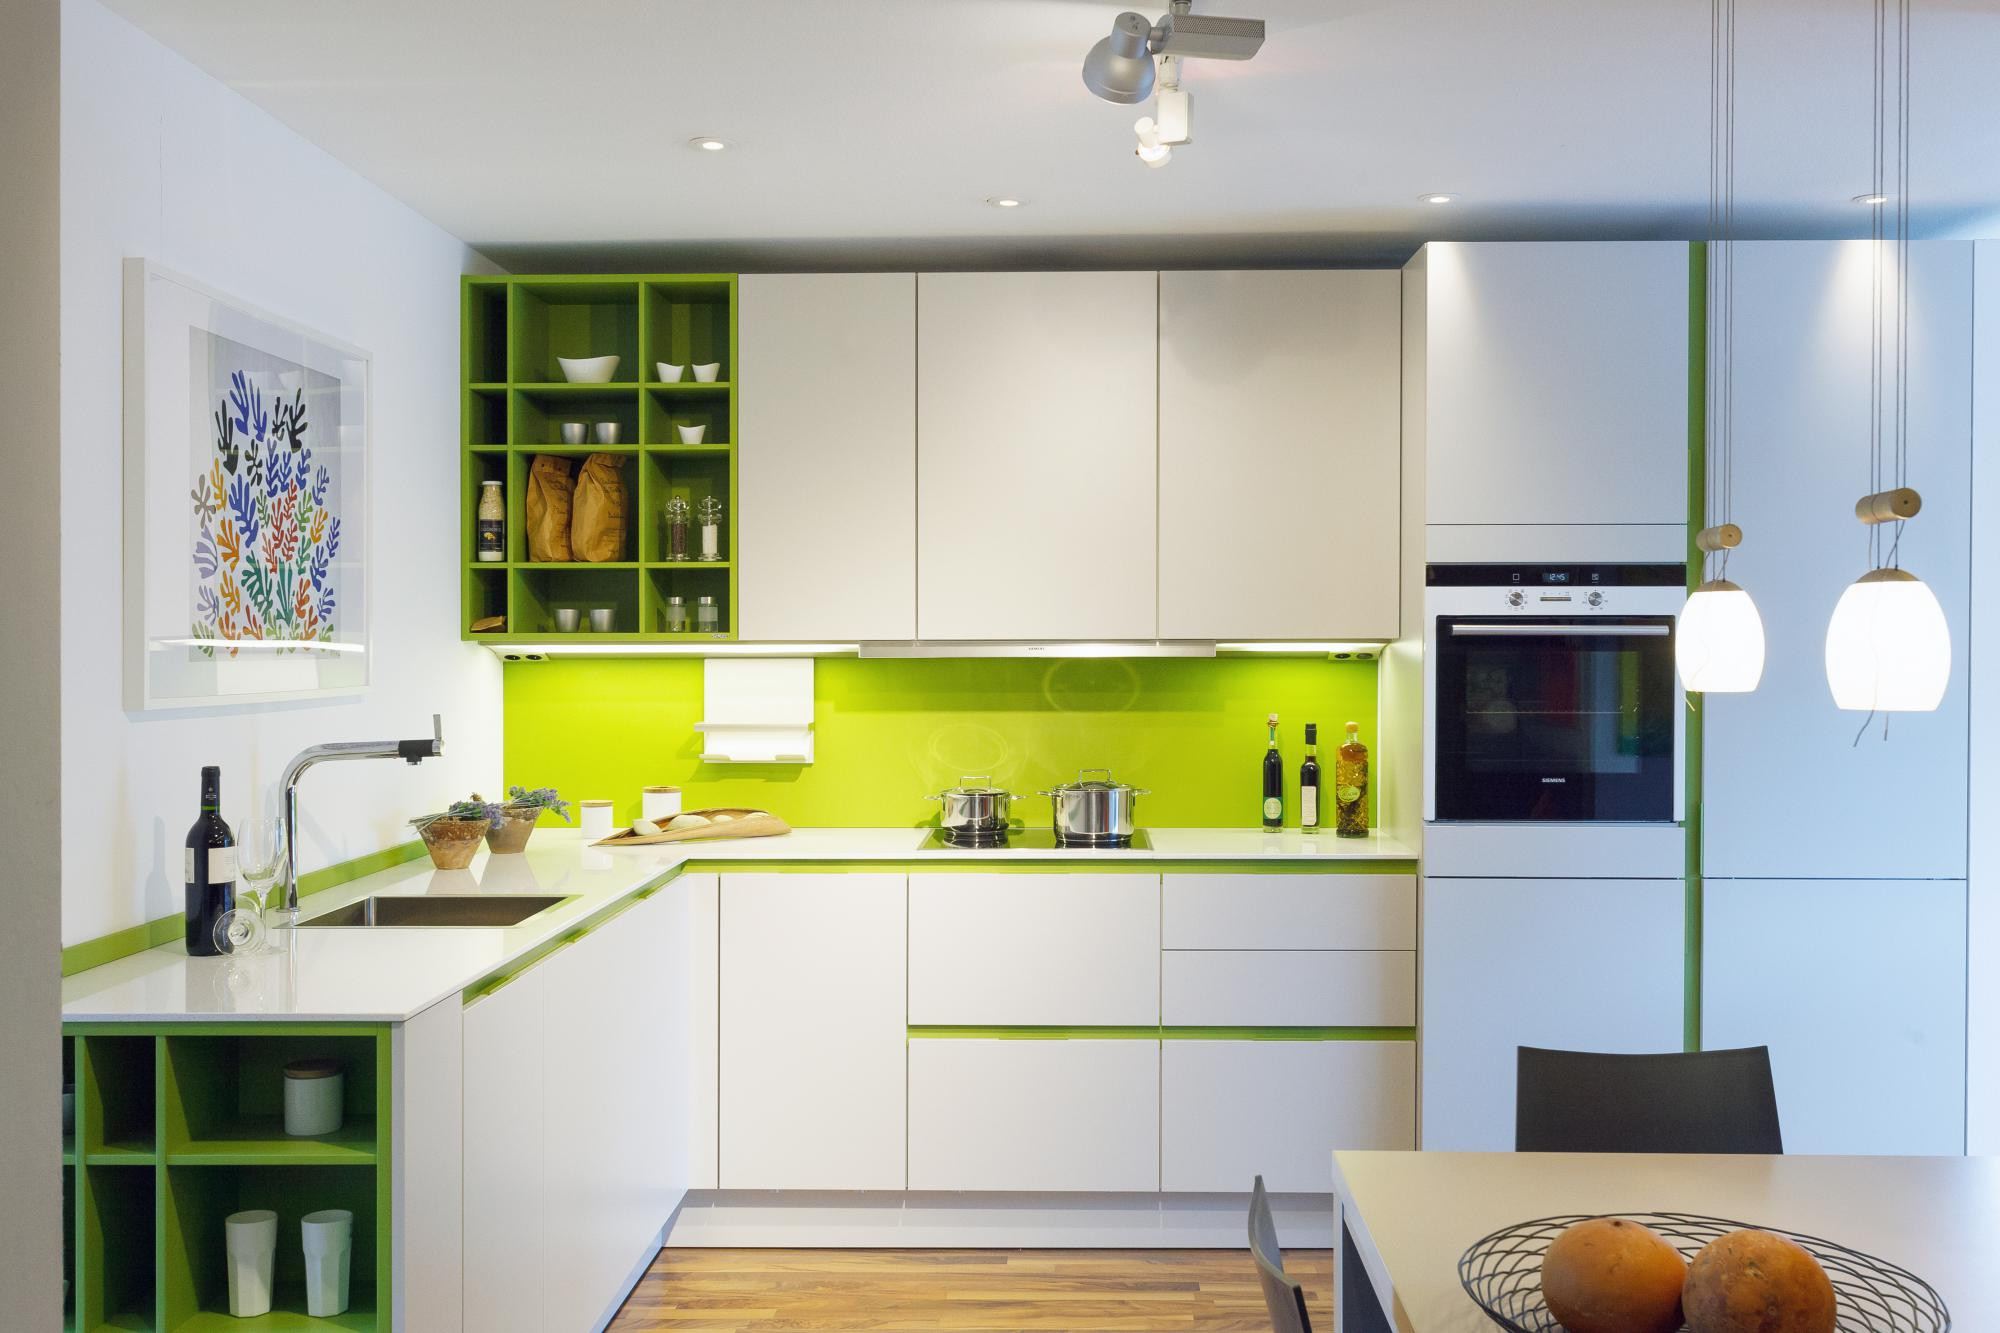 Modern Colors For Kitchen
 Contemporary Kitchen Design Kitchens with a Pop of Color